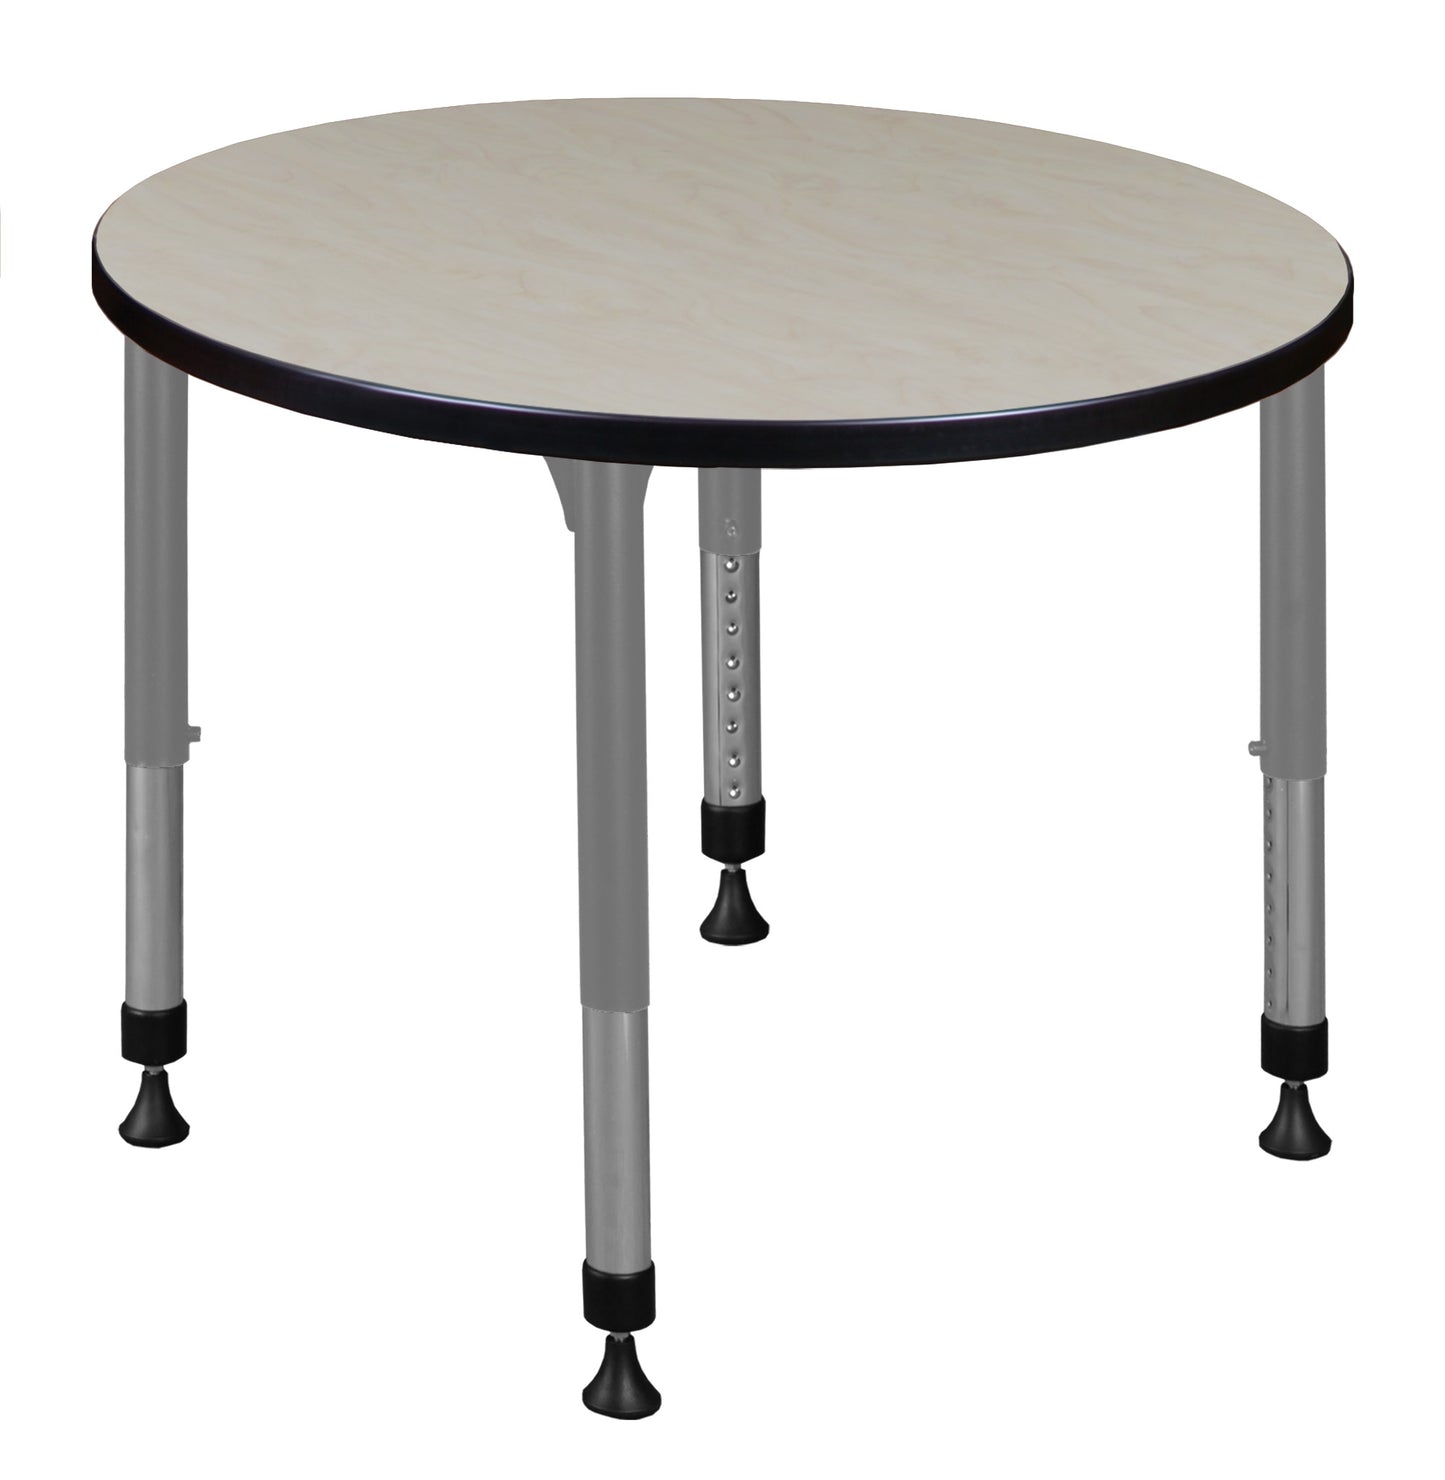 Regency Kee 30 in. Round Height Adjustable Mobile Classroom Activity Table